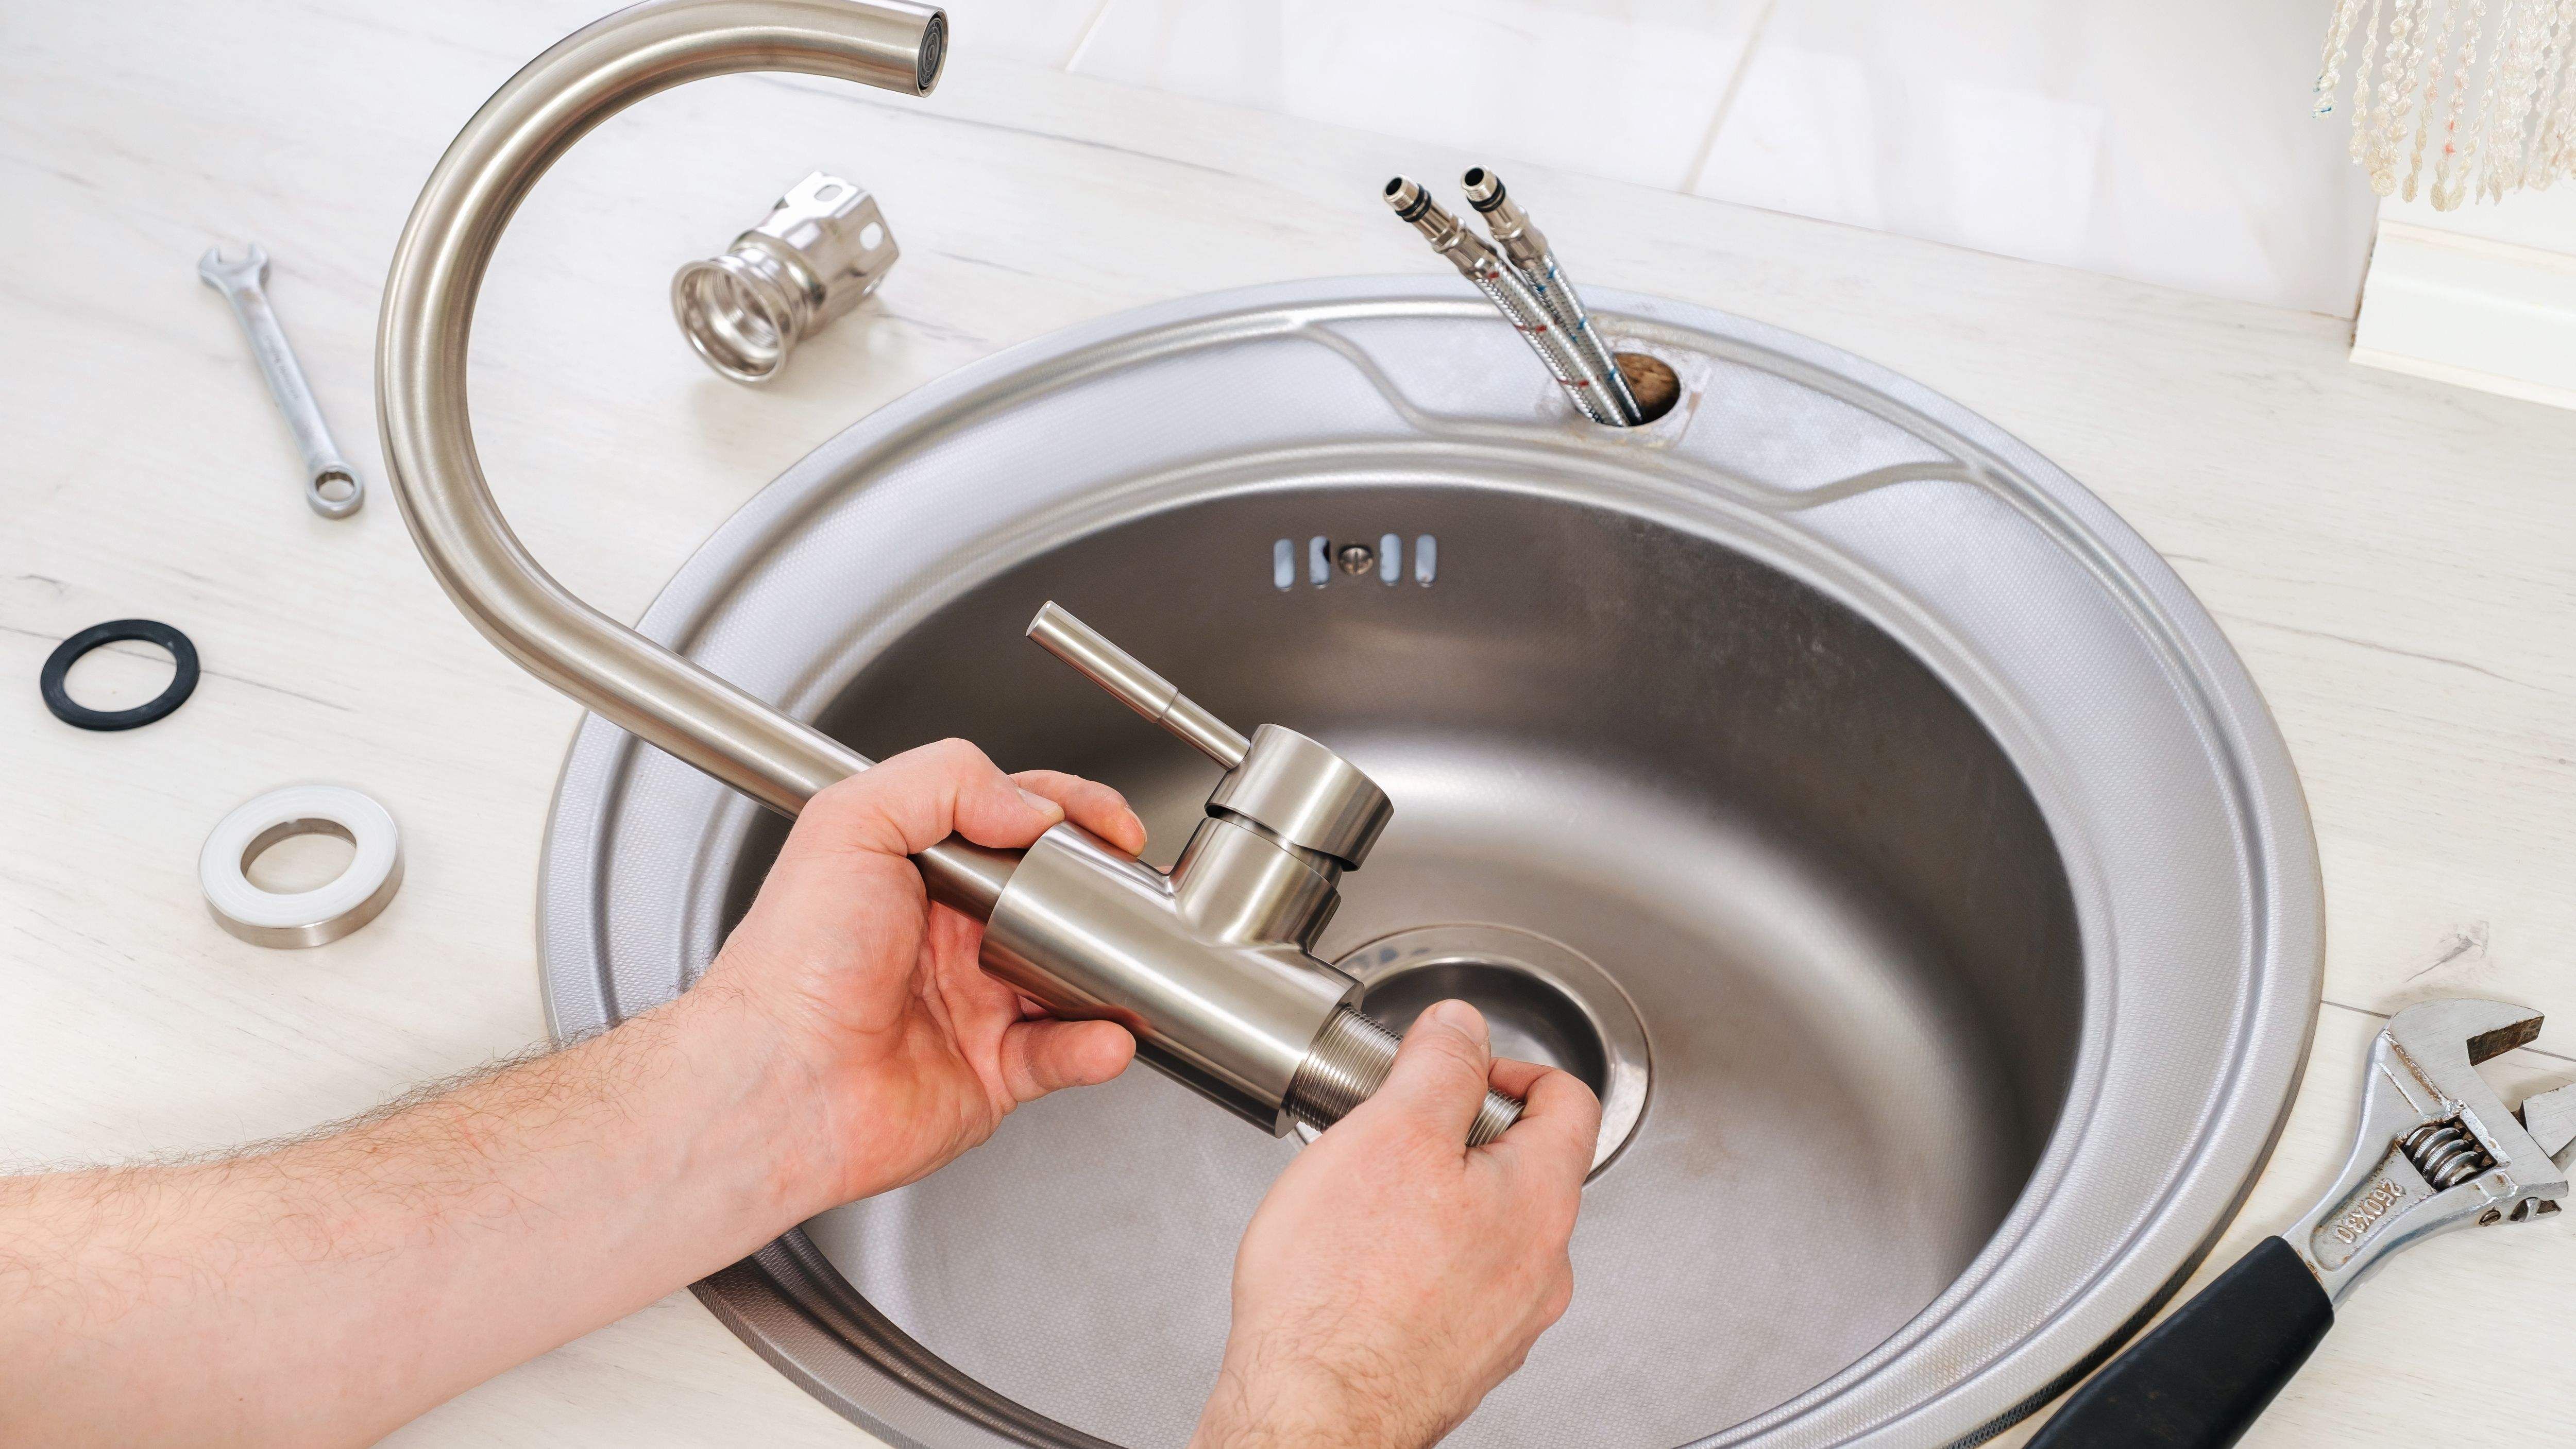 How to install a kitchen mixer tap